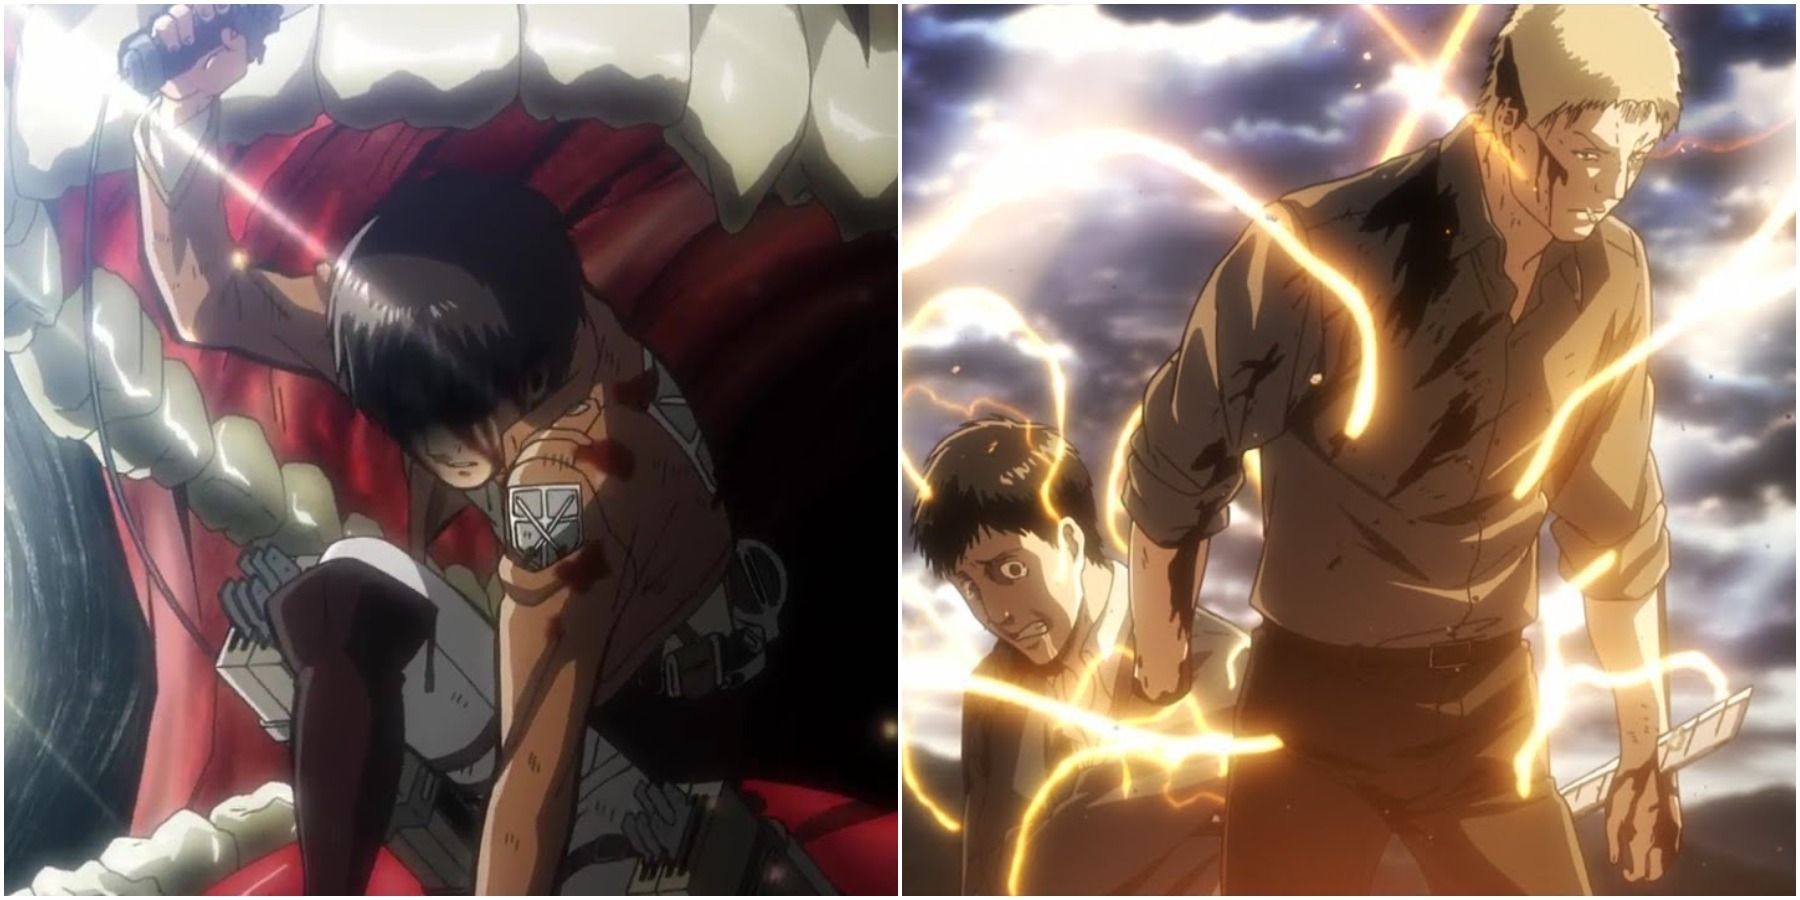 Ways in which the Survey Corps saved humanity in Attack on Titan